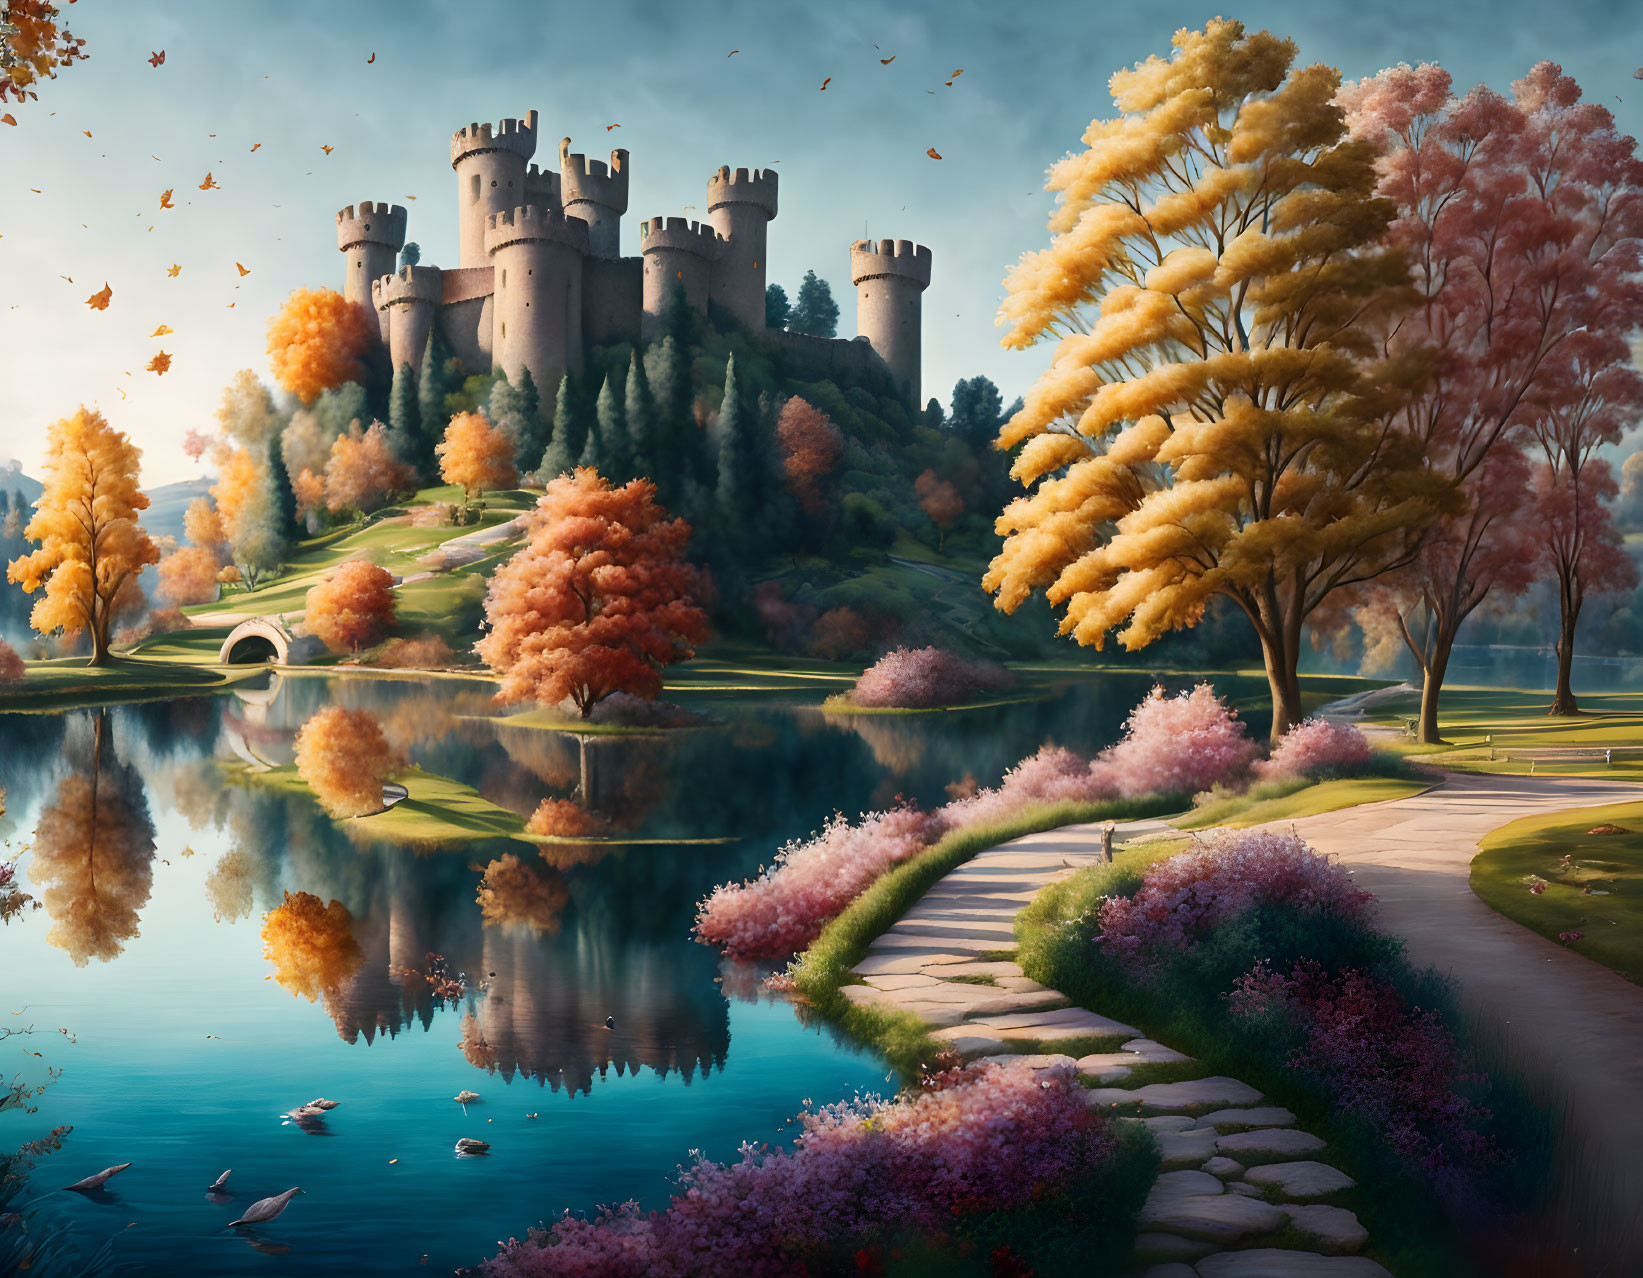 Majestic castle on hill surrounded by autumn landscape and tranquil lake